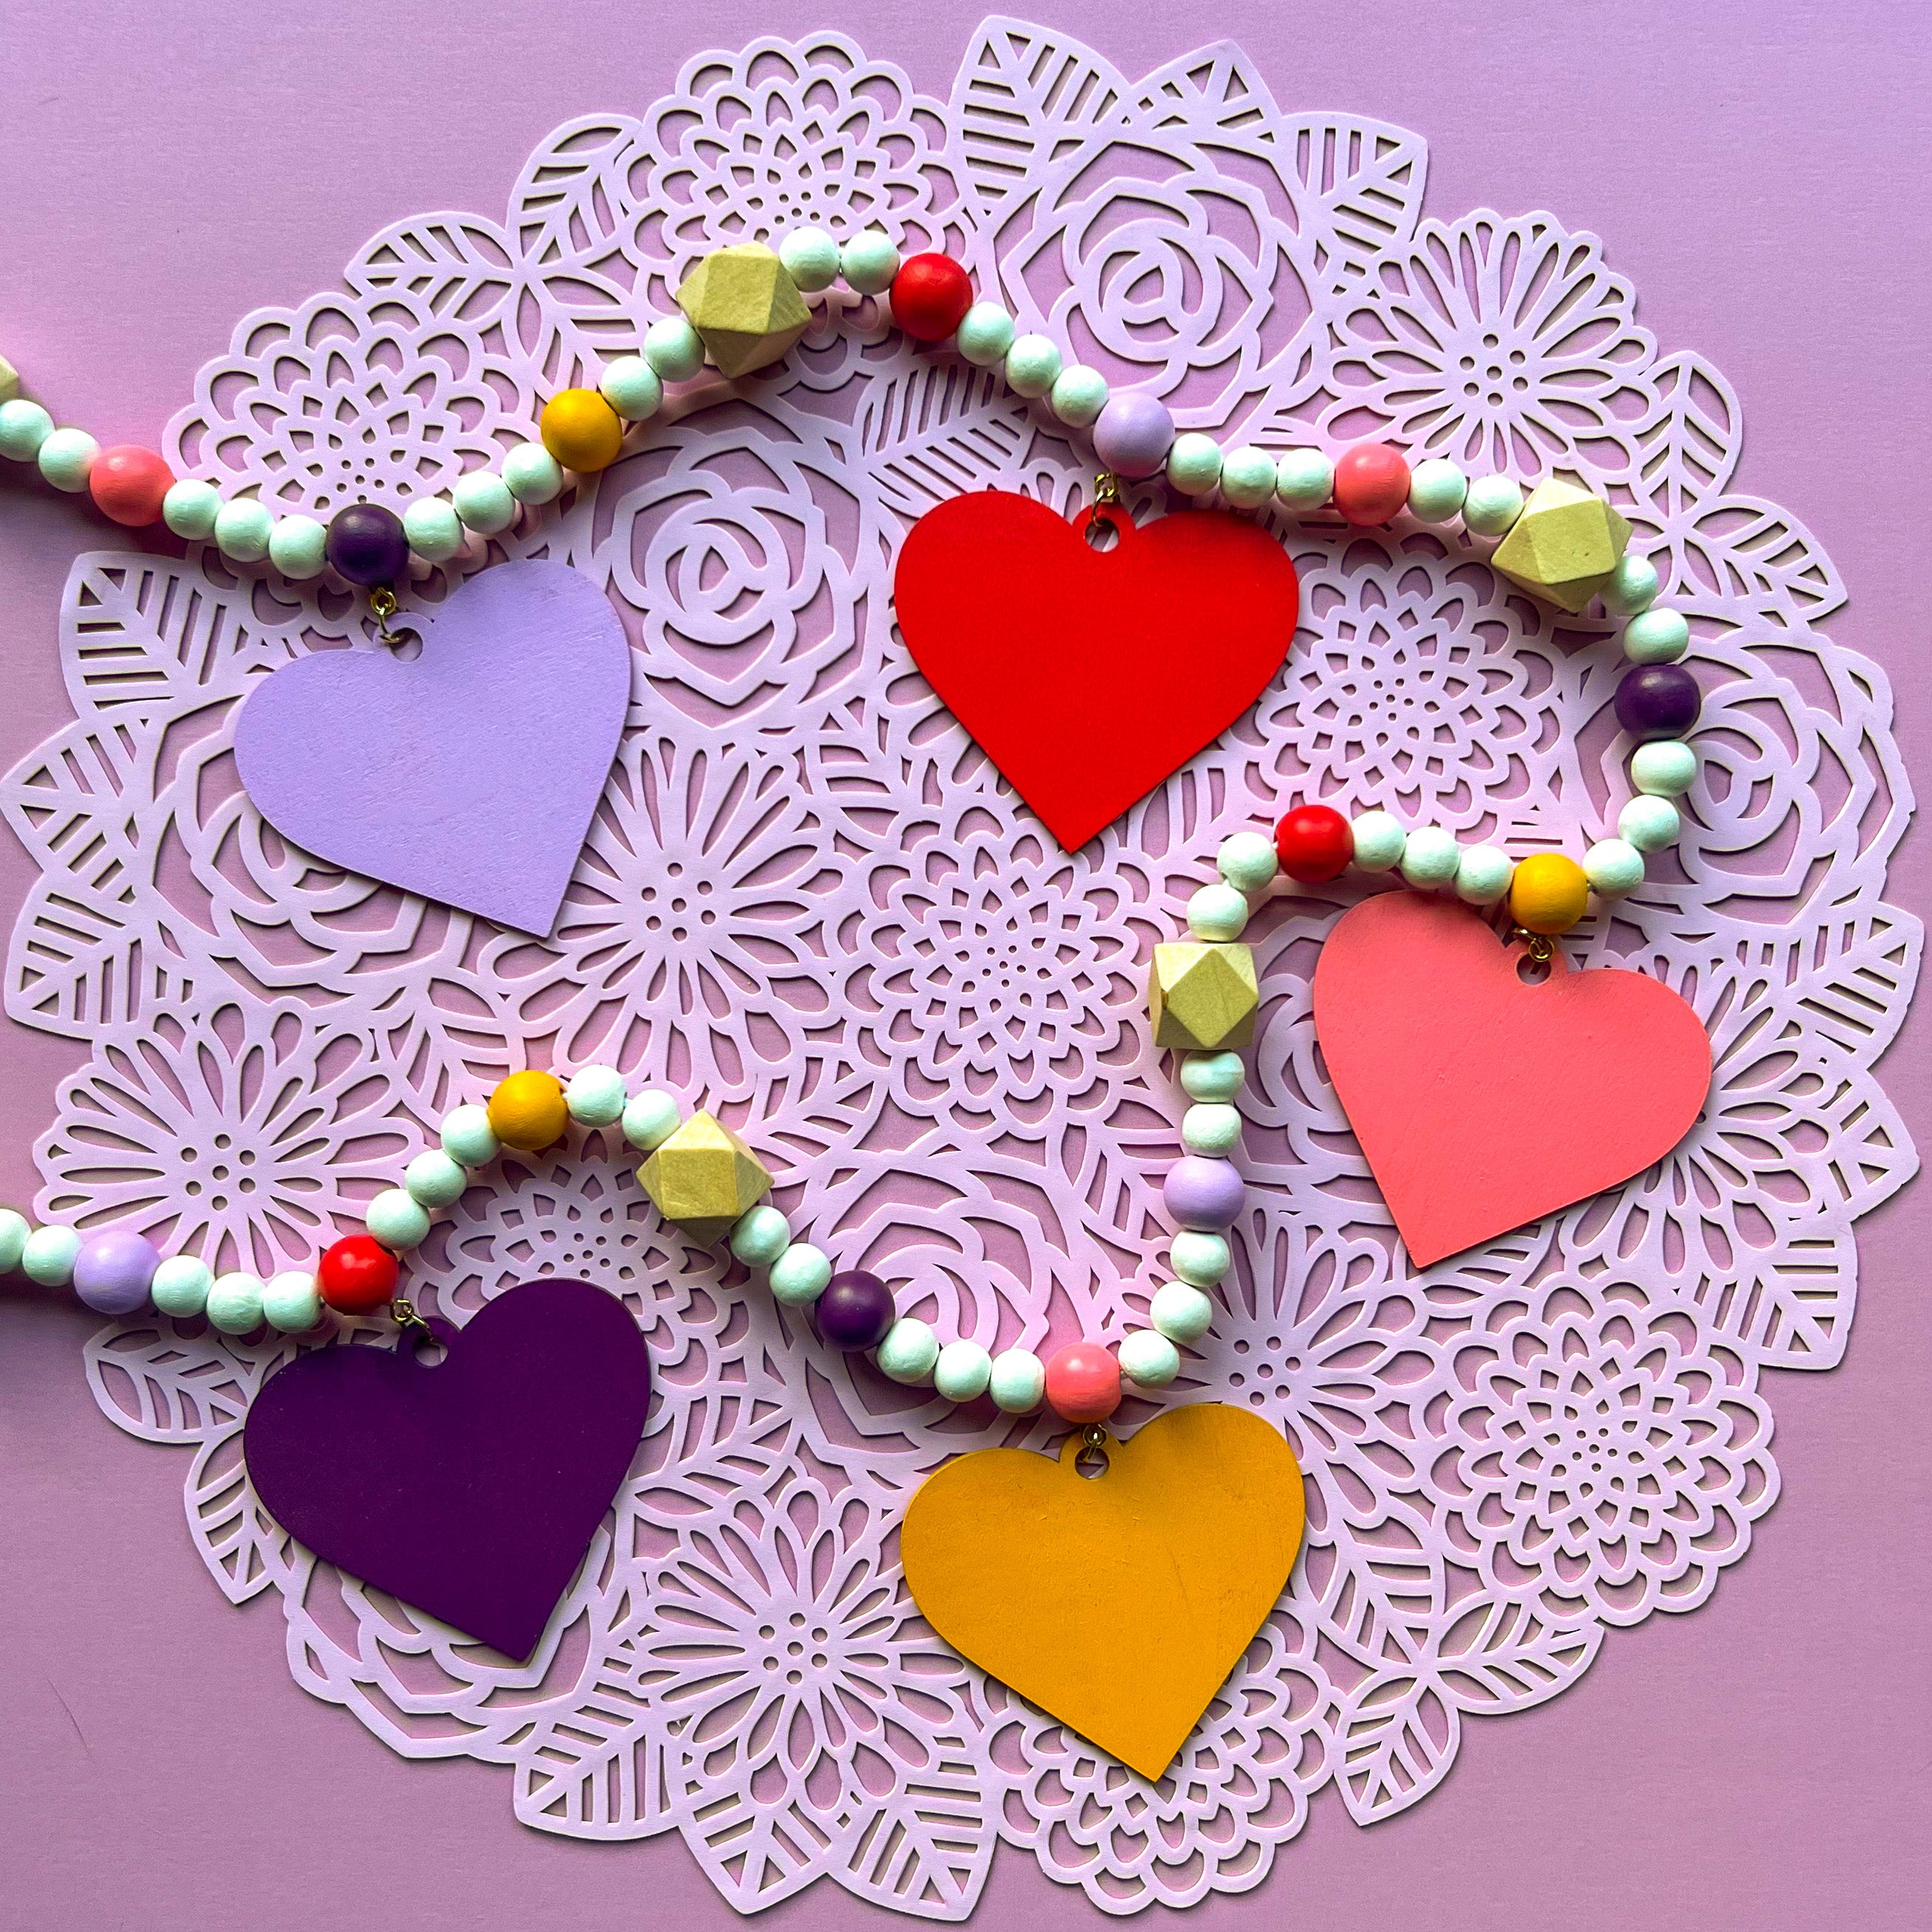 Images shows a garland with wood hearts in various colors – lavender, plum, golden yellow, bright pink, and pinkish-red. Hearts hang from natural geometric wood beads with a gold jump ring and eye screw. Those beads are strung with beads in corresponding colors to the hearts and smaller white beads on 2mm white macrame cord. 4-inch loops on each end make hanging the garland easy.